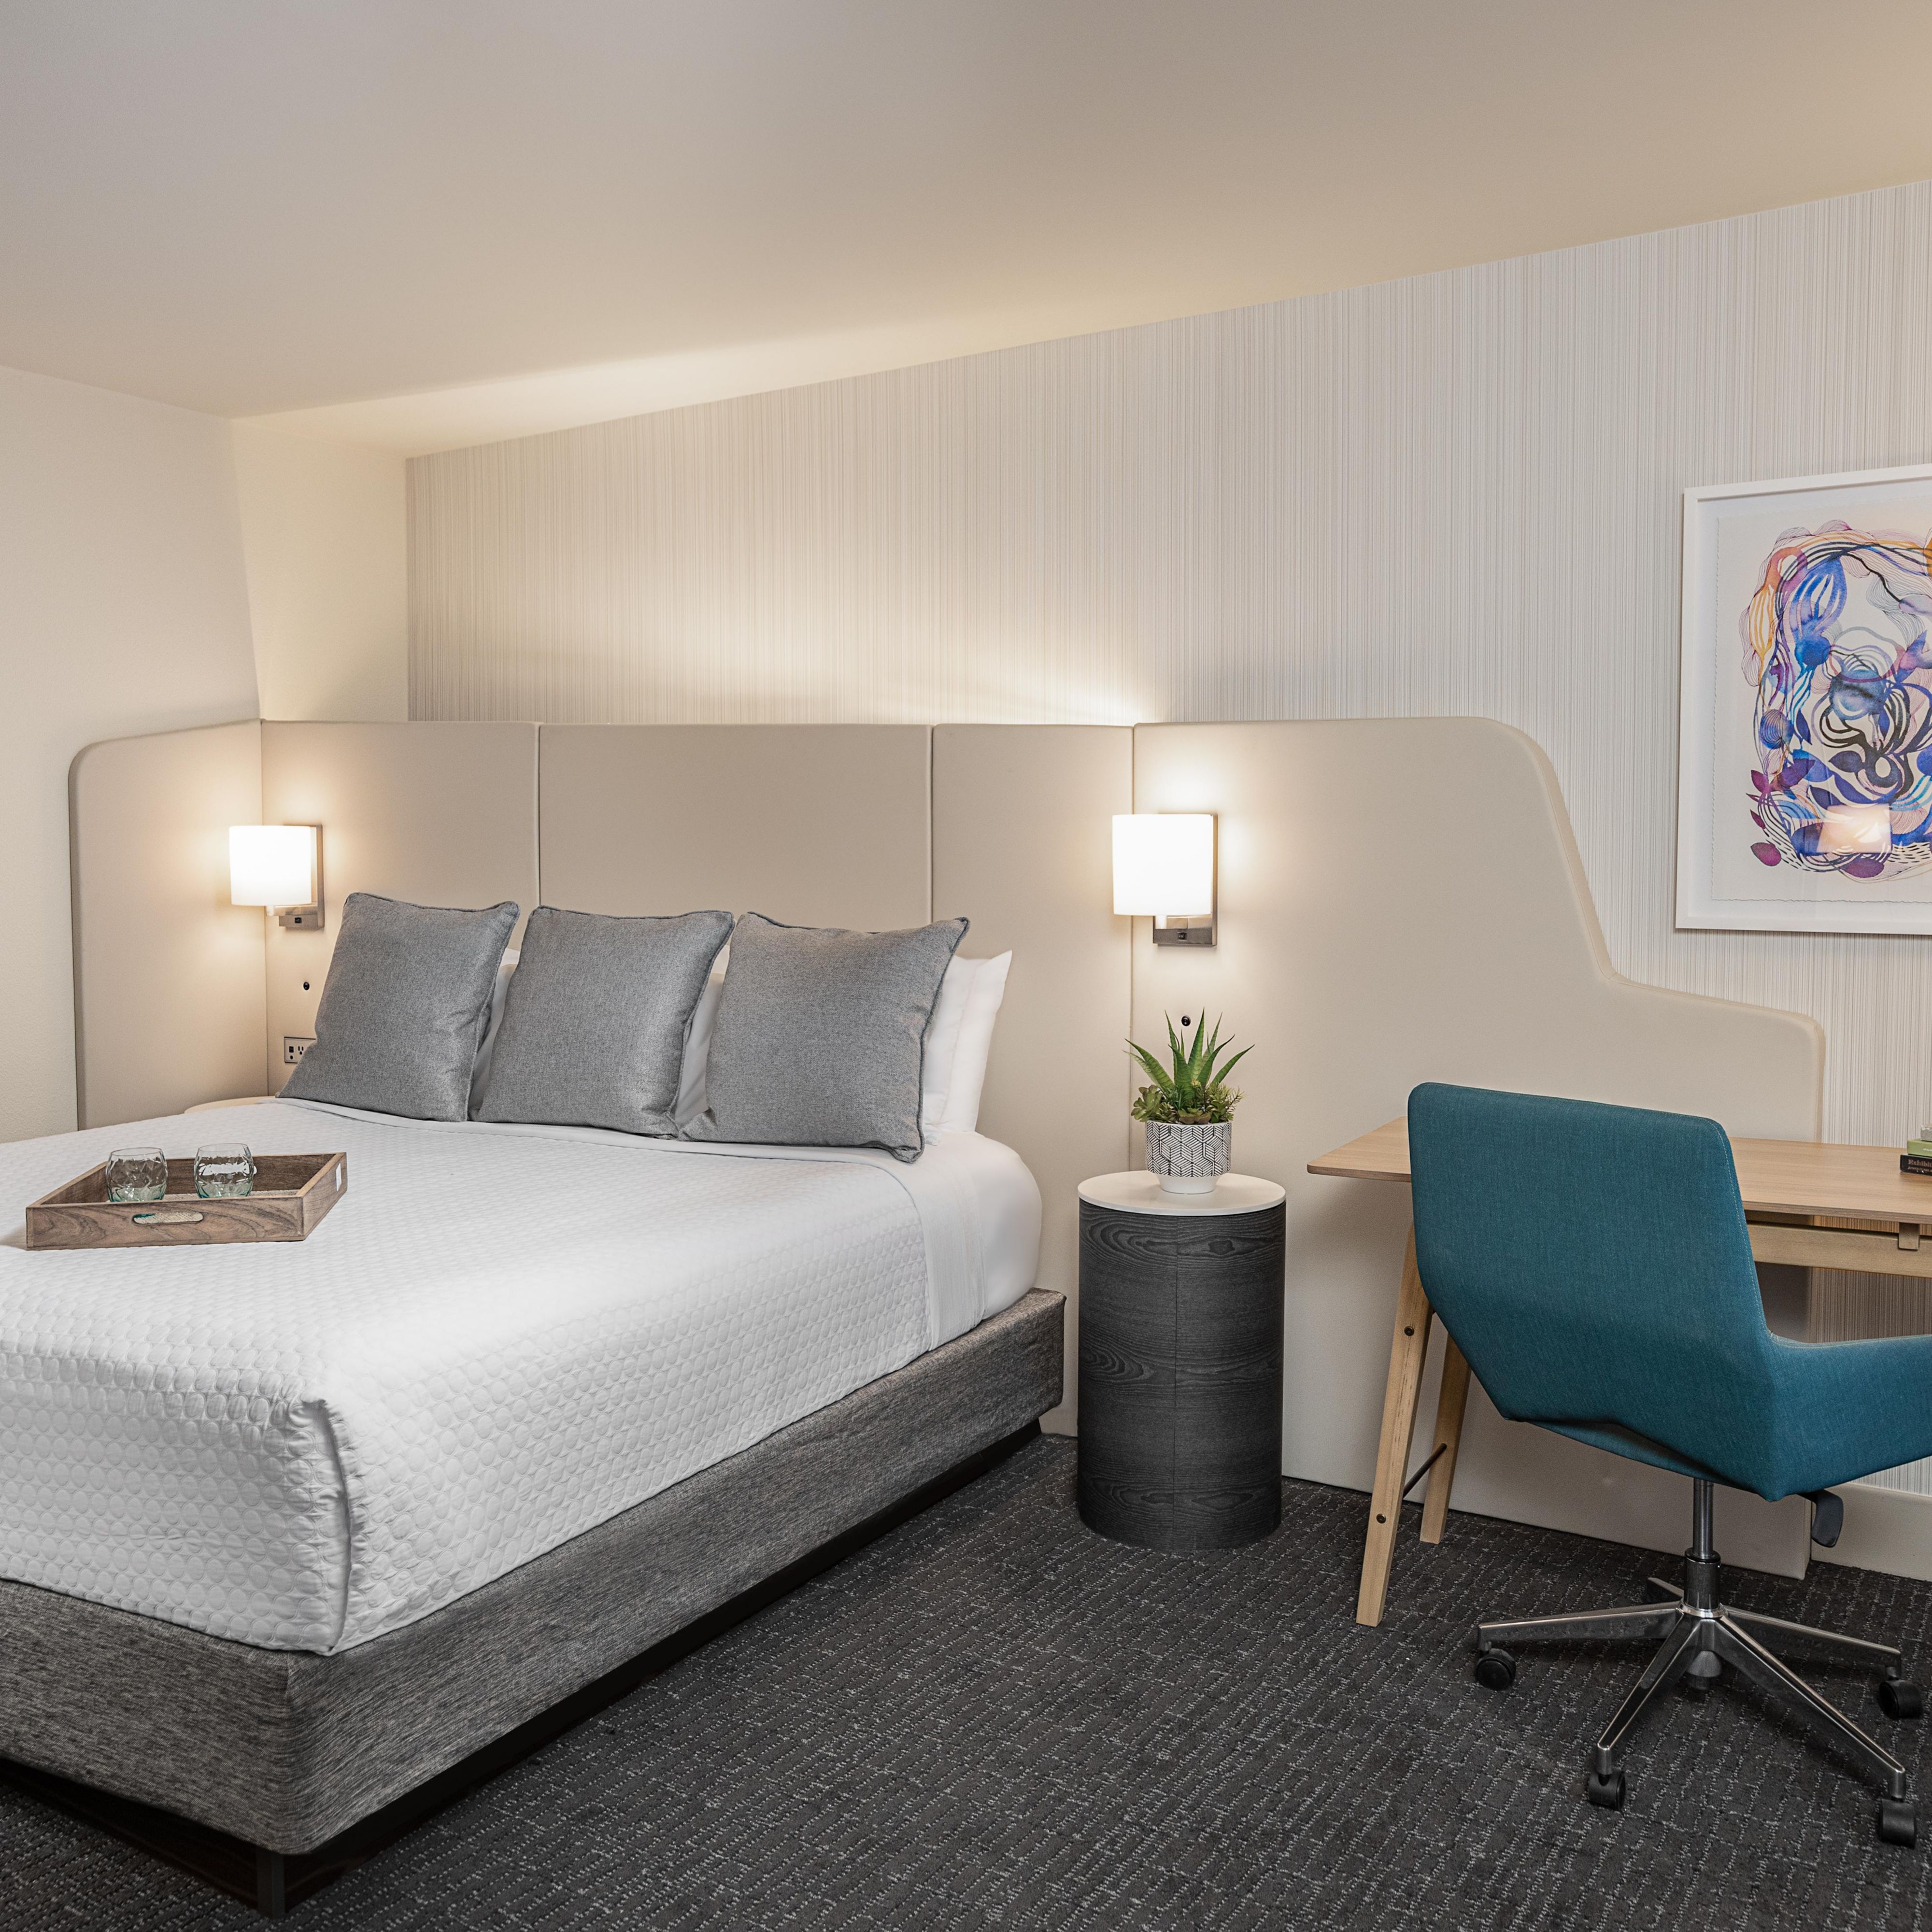 WorkLife rooms give flexibility for a more productive tomorrow.